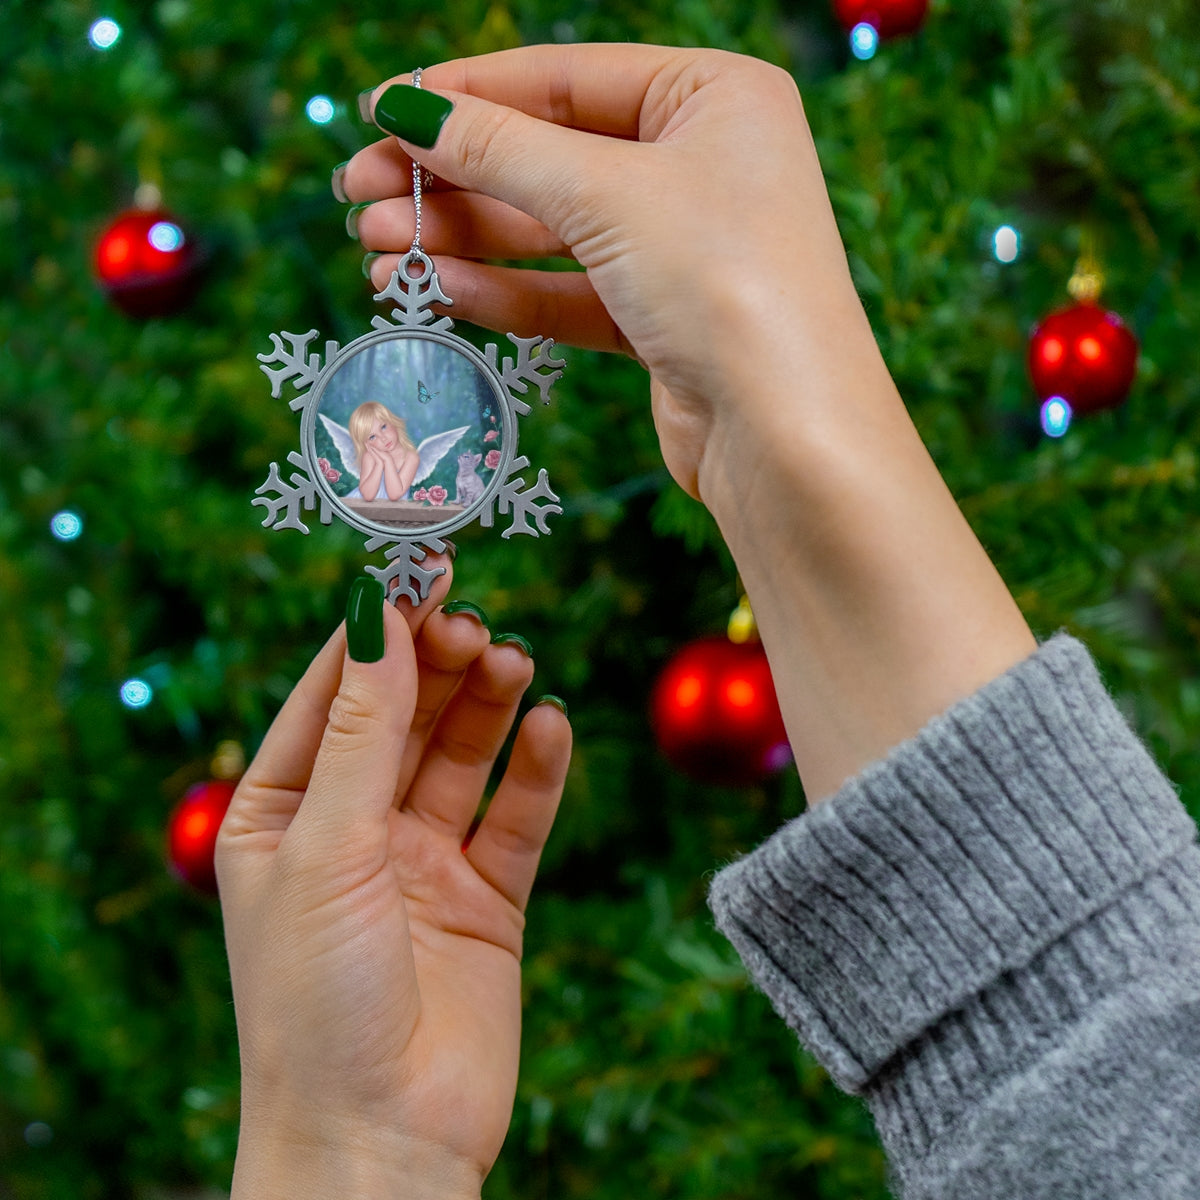 Snowflake Ornament - Little Miracles